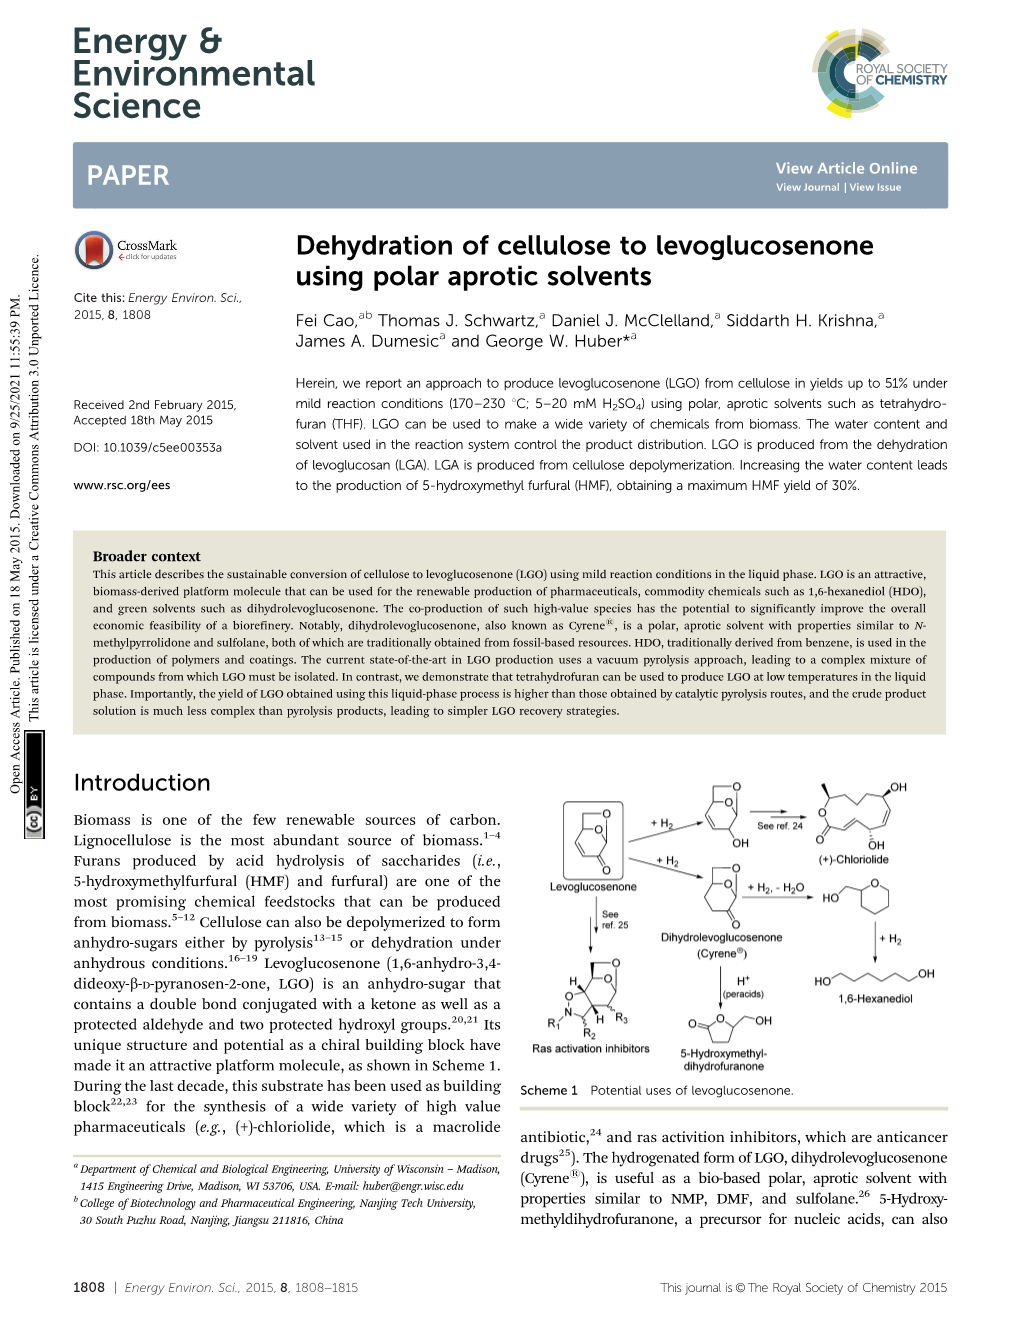 Dehydration of Cellulose to Levoglucosenone Using Polar Aprotic Solvents Cite This: Energy Environ